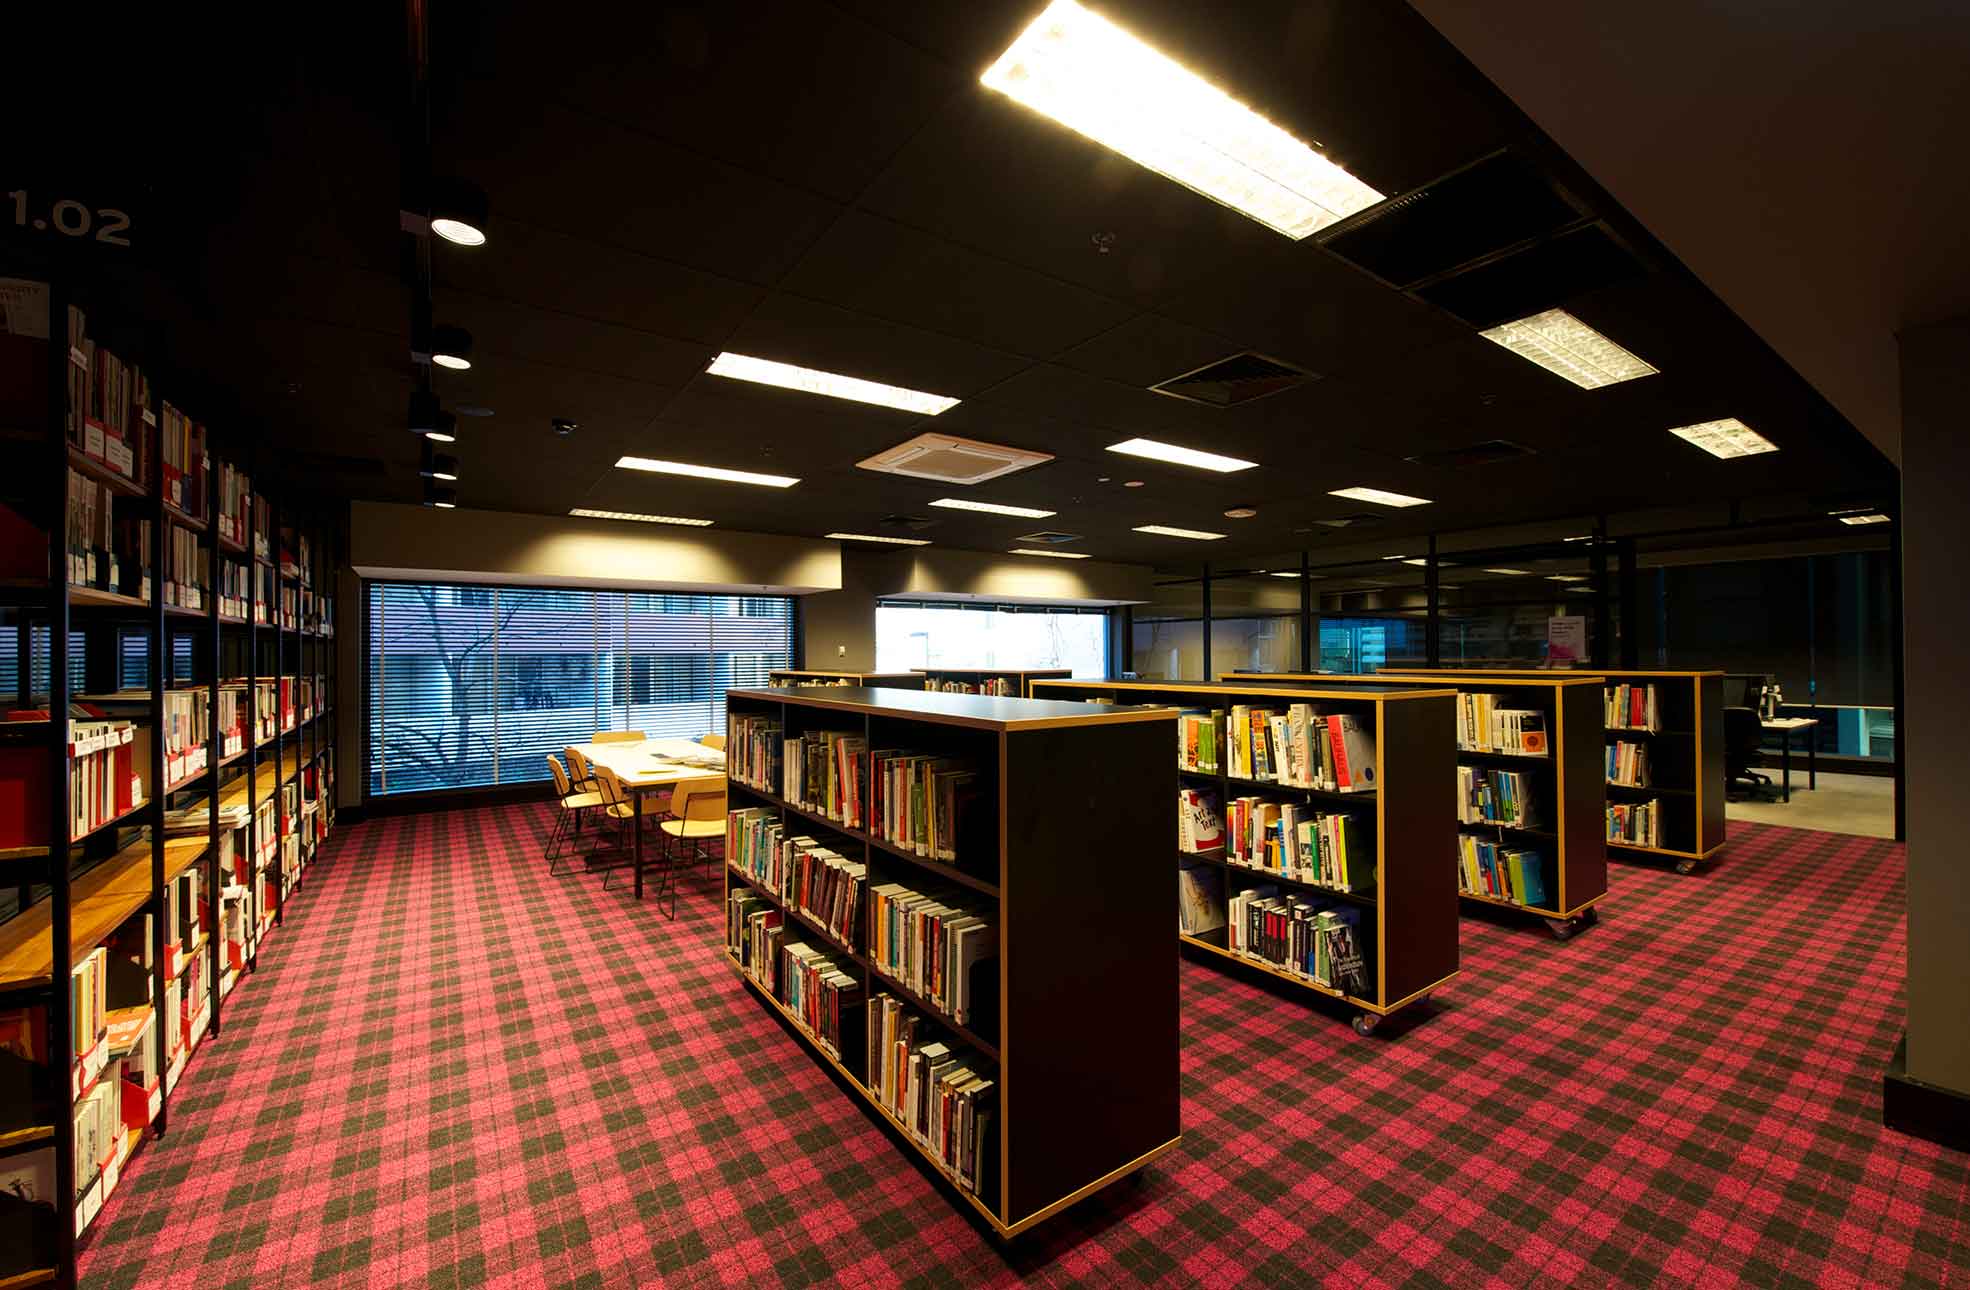 Refurbished fitout of library, rows of books and old world feel in heritage building.